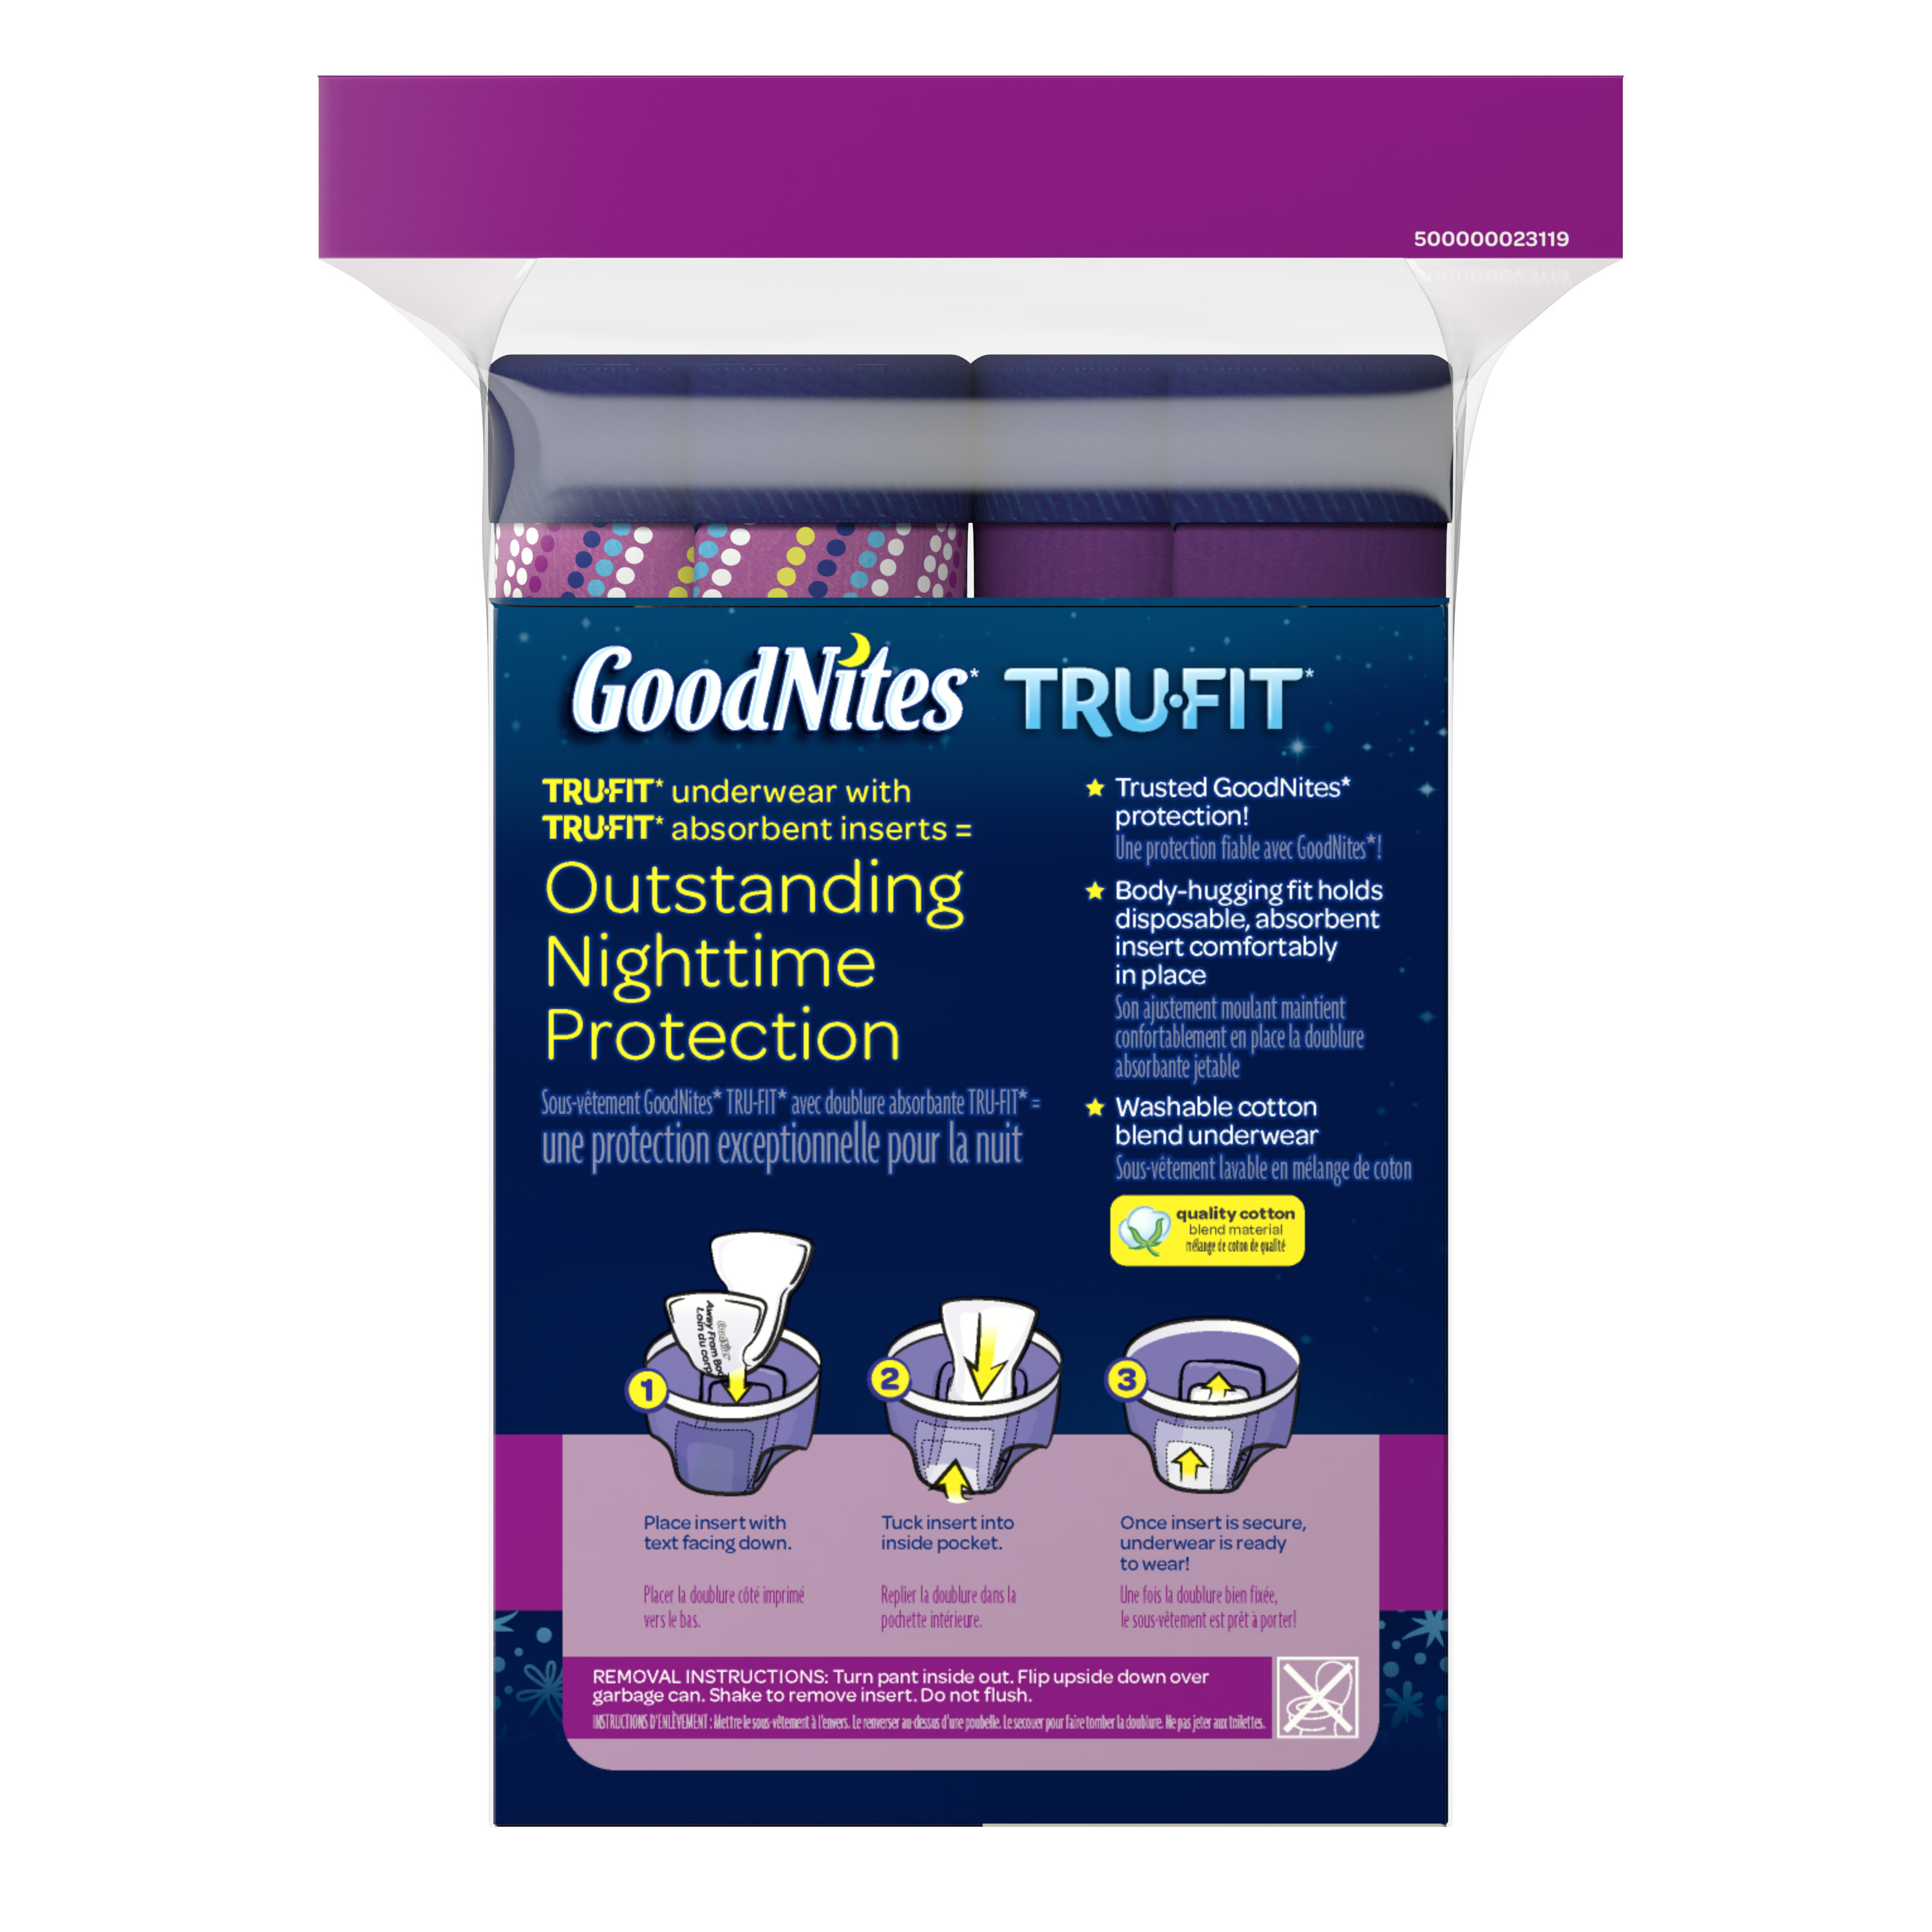 GoodNites Tru-Fit Bedwetting Underwear with Nighttime Protection Starter Pack for Girls, S/M, 7ct - image 3 of 6